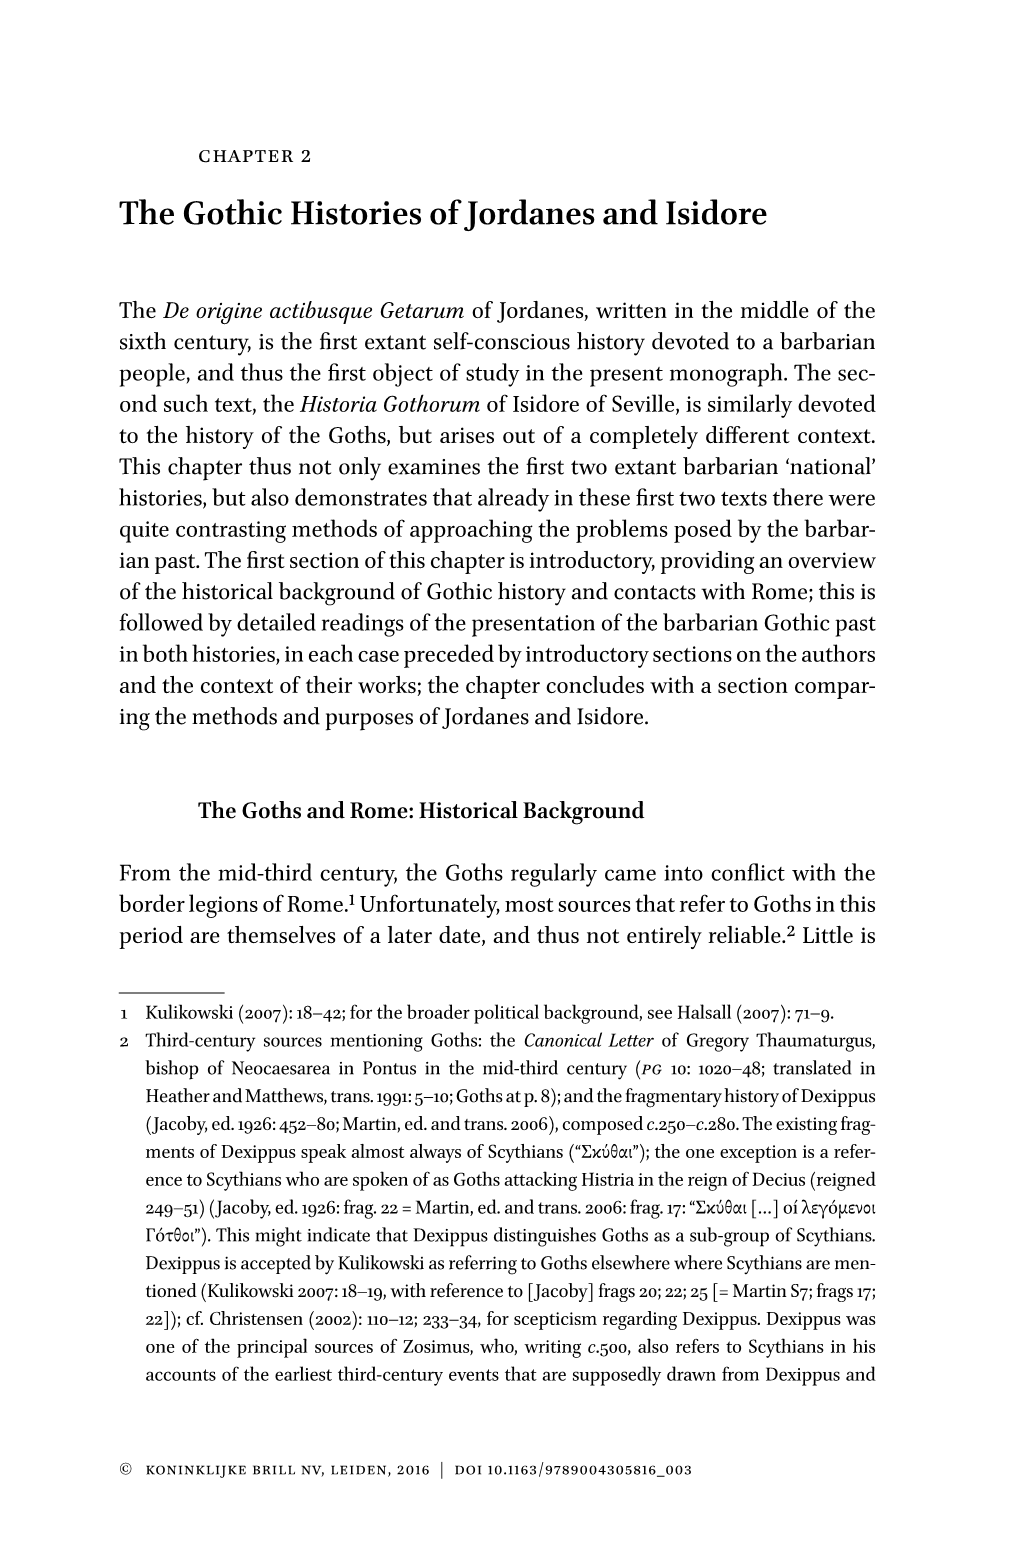 The Gothic Histories of Jordanes and Isidore